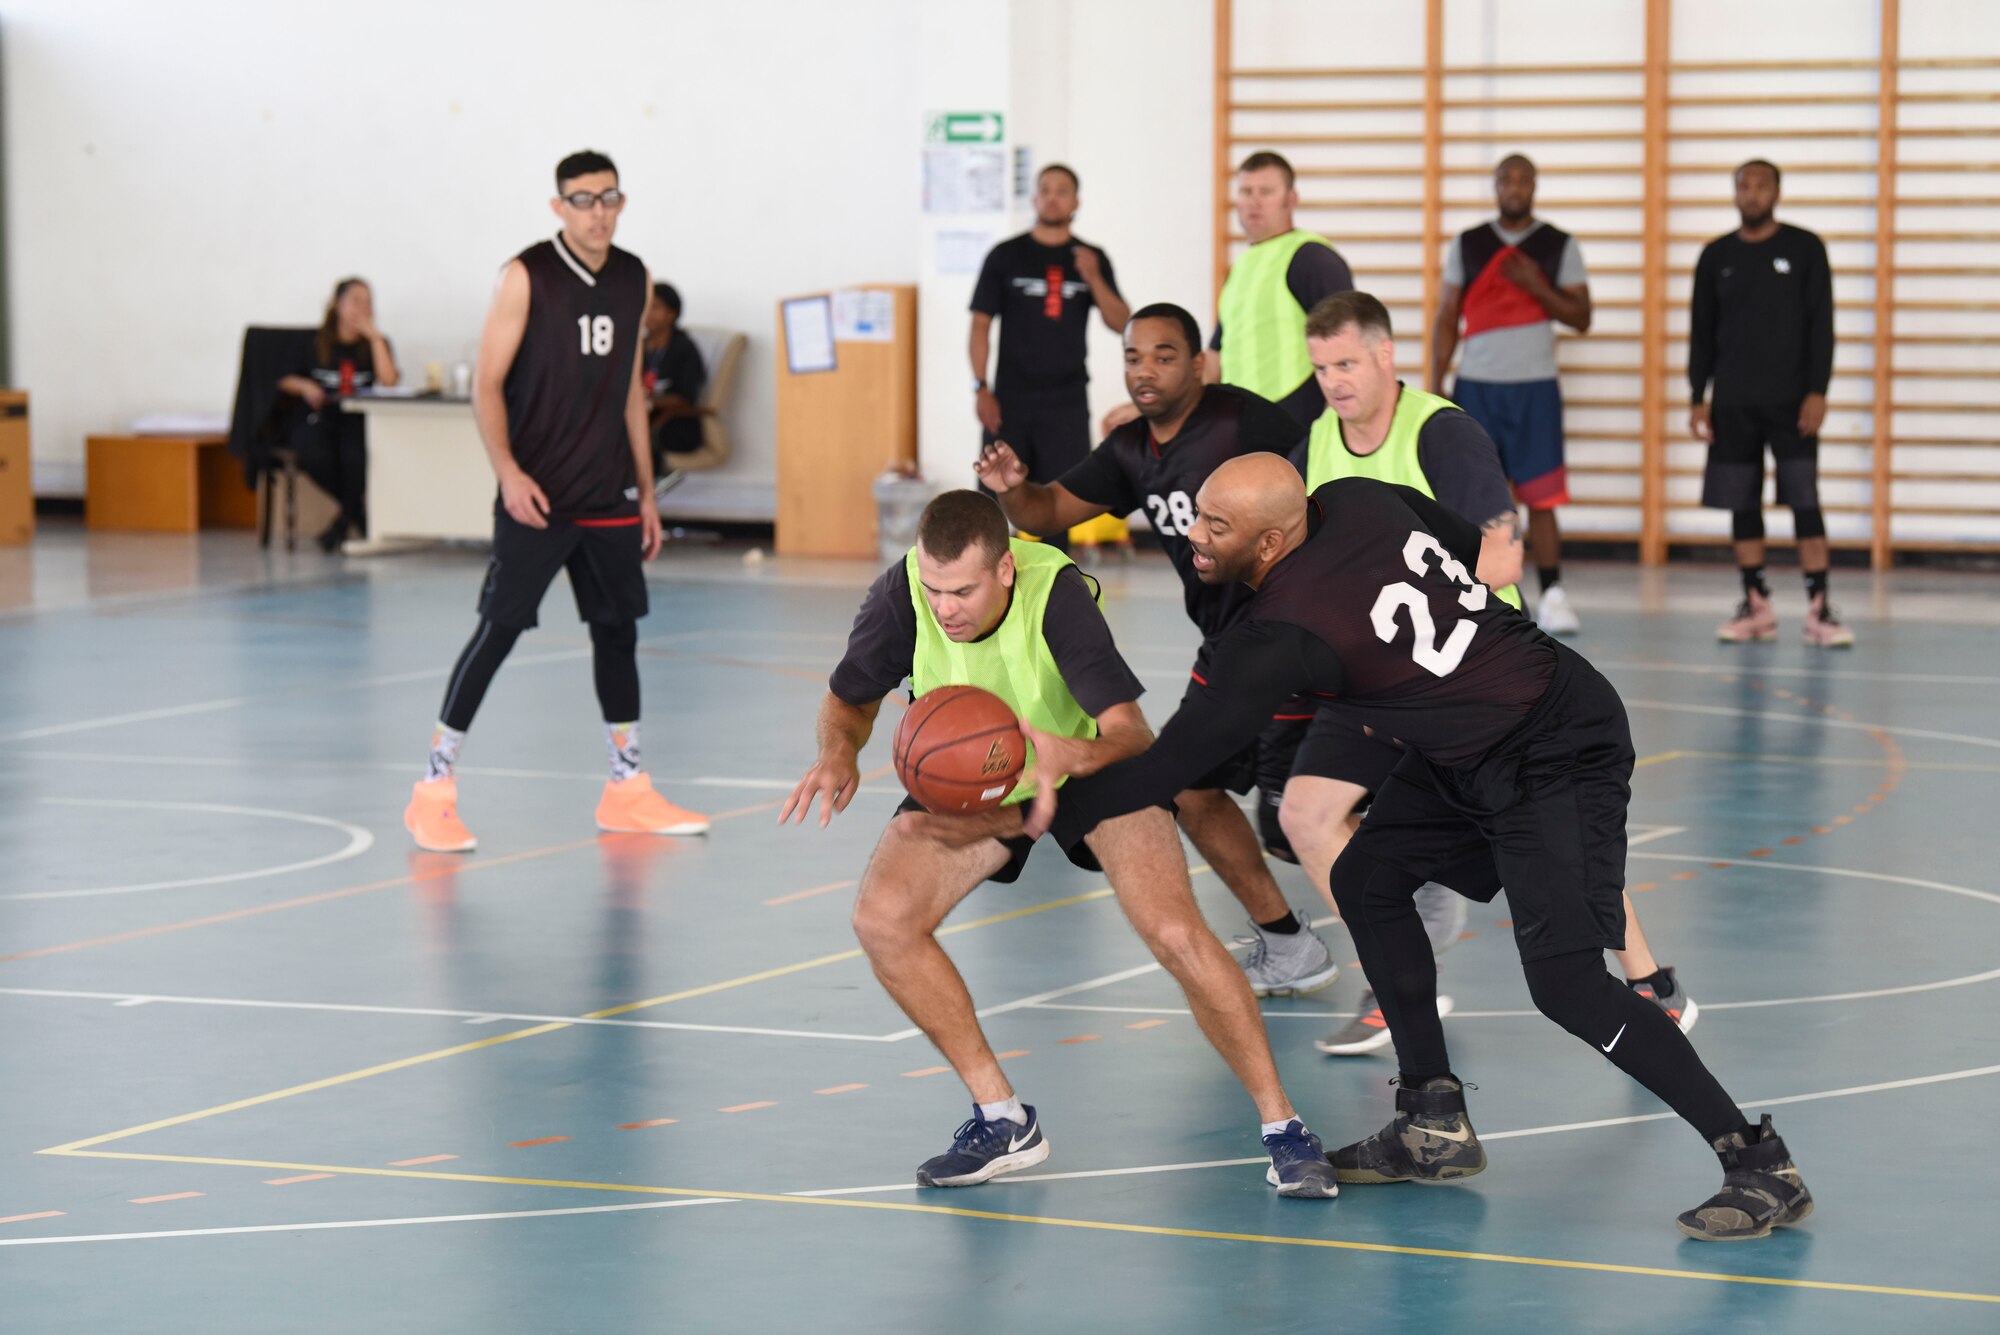 The U.S. team steals the ball during the basketball portion of the Friendship Games Feb. 6, 2019, at Al Dhafra Air Base, United Arab Emirates.